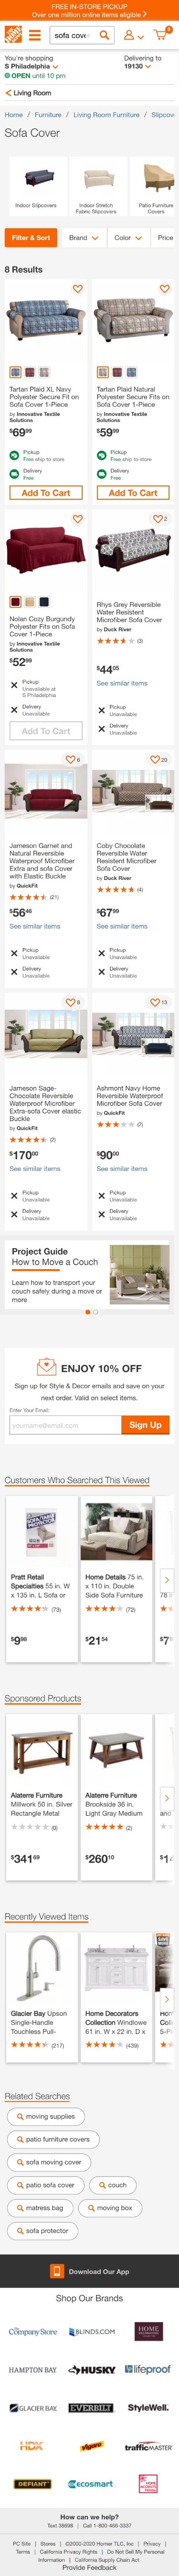 homedepot search result page mobile